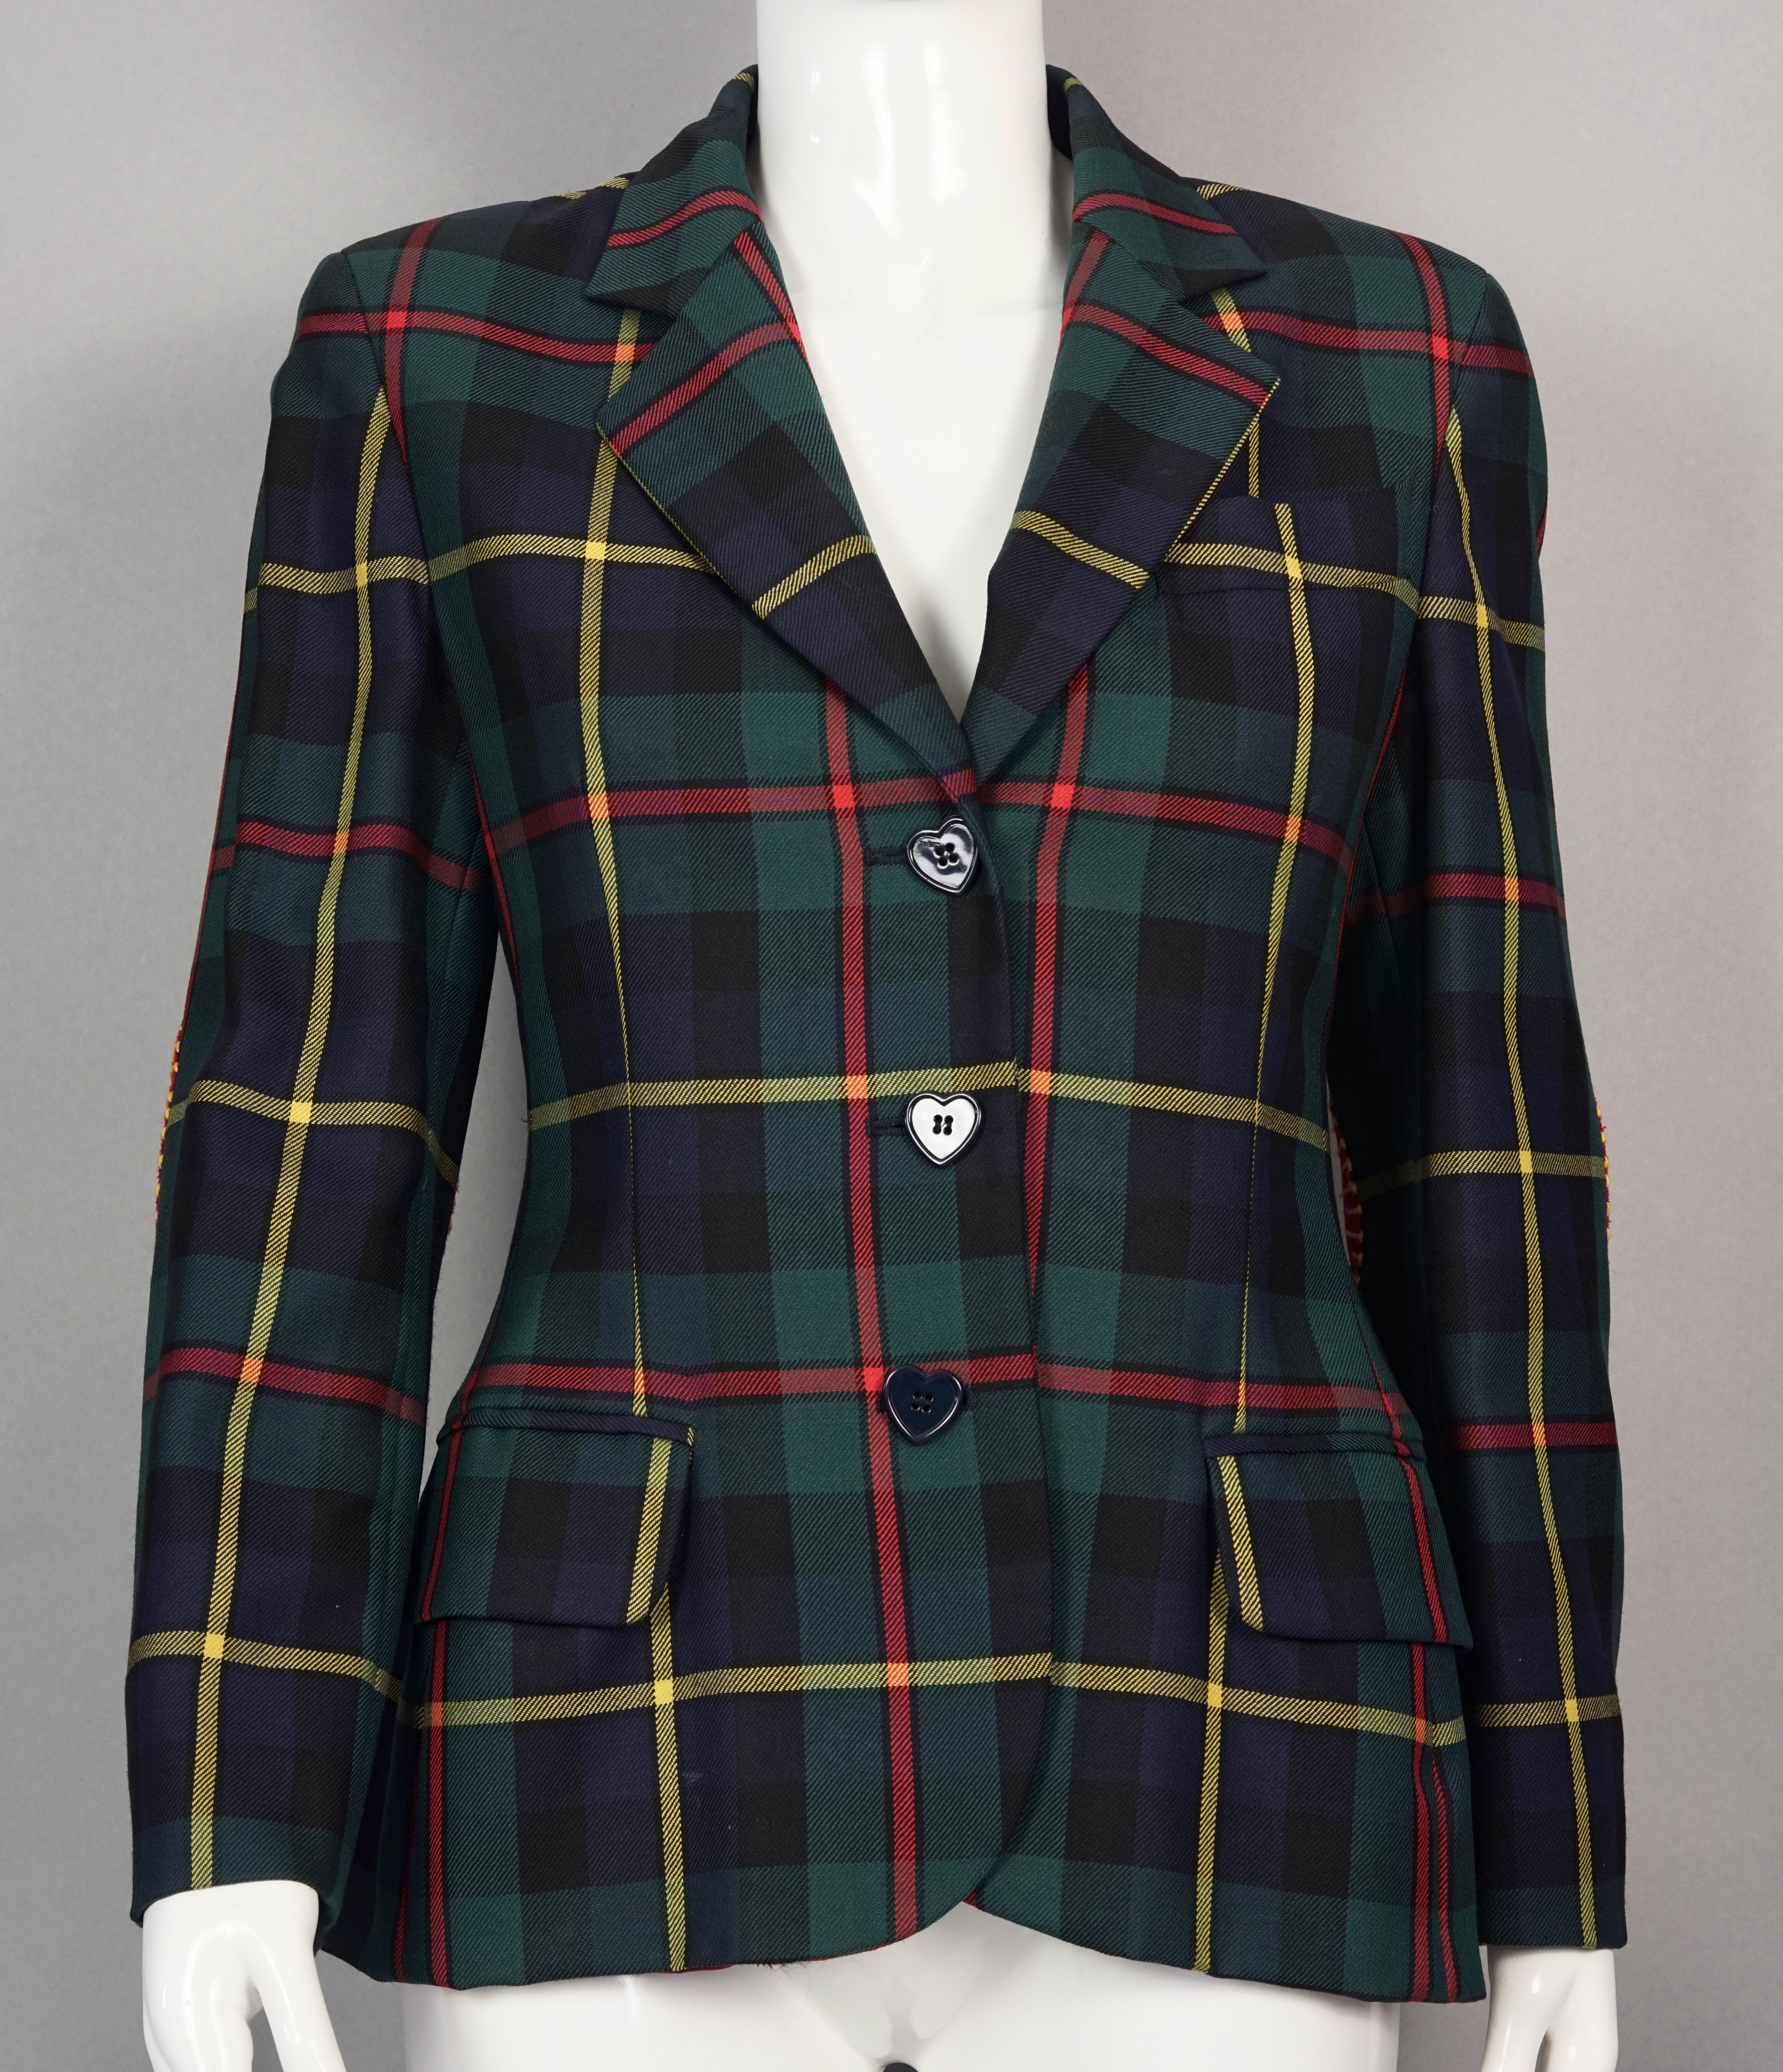 Vintage MOSCHINO CHEAP and CHIC Tartan Heart Elbow Novelty Jacket

Measurements taken laid flat, please double bust and waist:
Shoulder: 15.75 inches (40 cm)
Sleeves: 22.83 inches (58 cm)
Bust: 17.71 inches (45 cm)
Waist: 15.35 inches (39